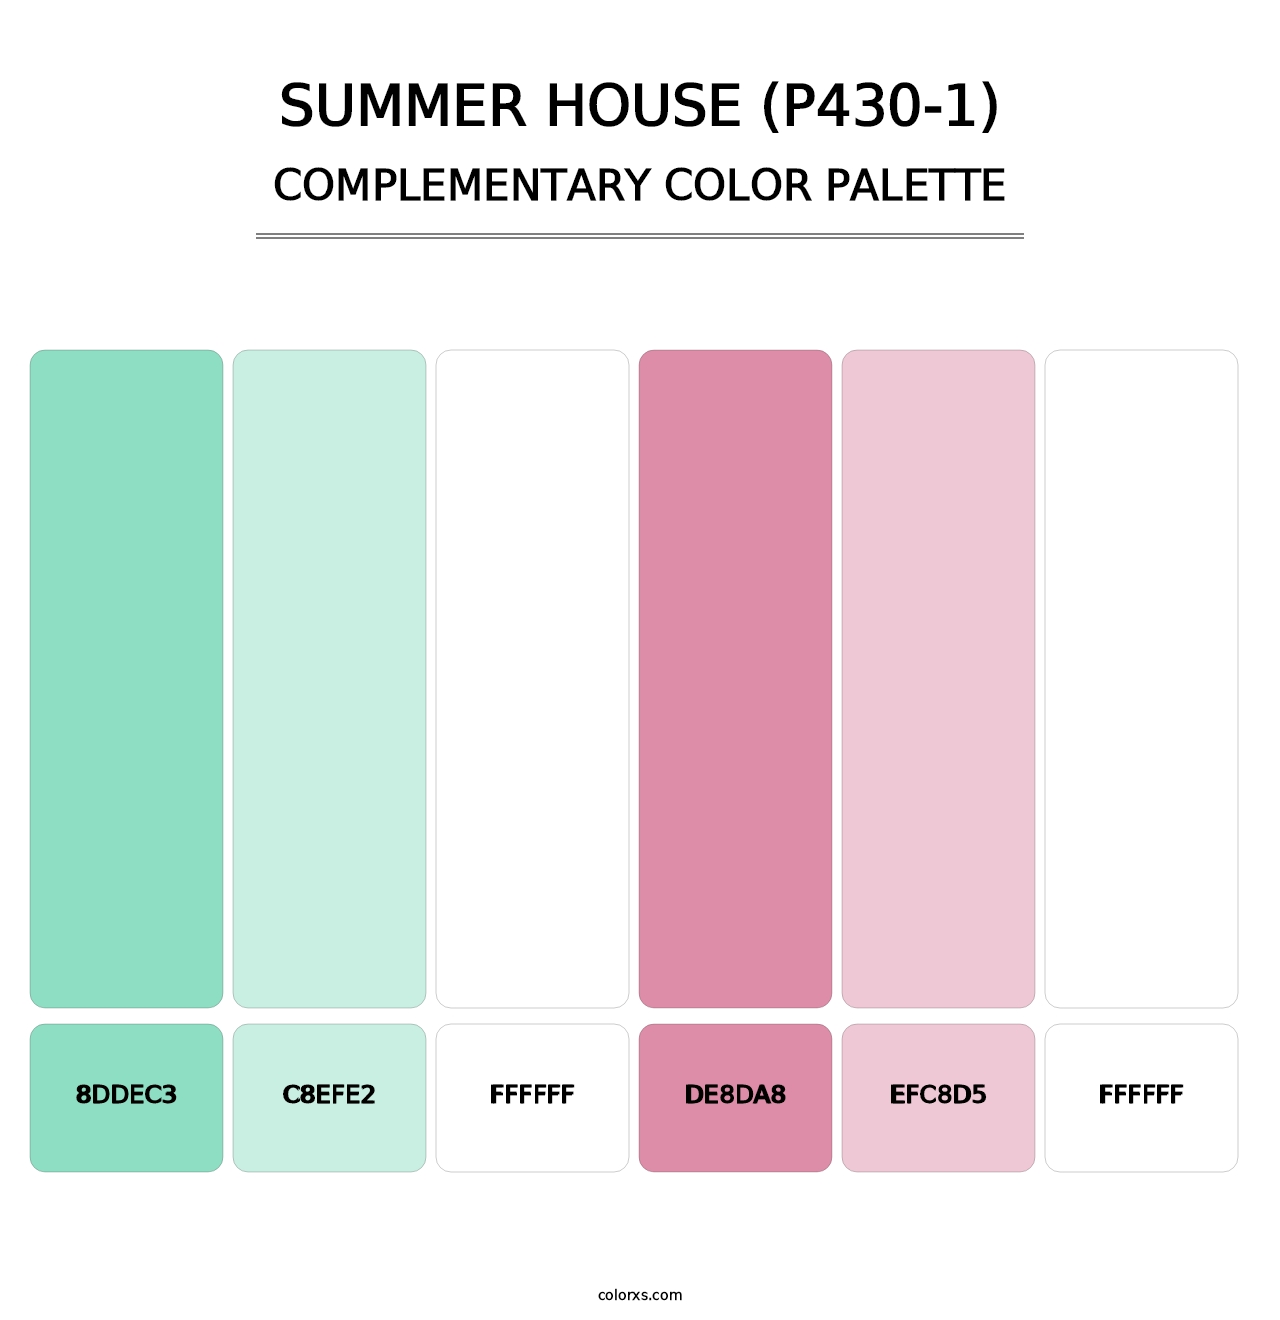 Summer House (P430-1) - Complementary Color Palette